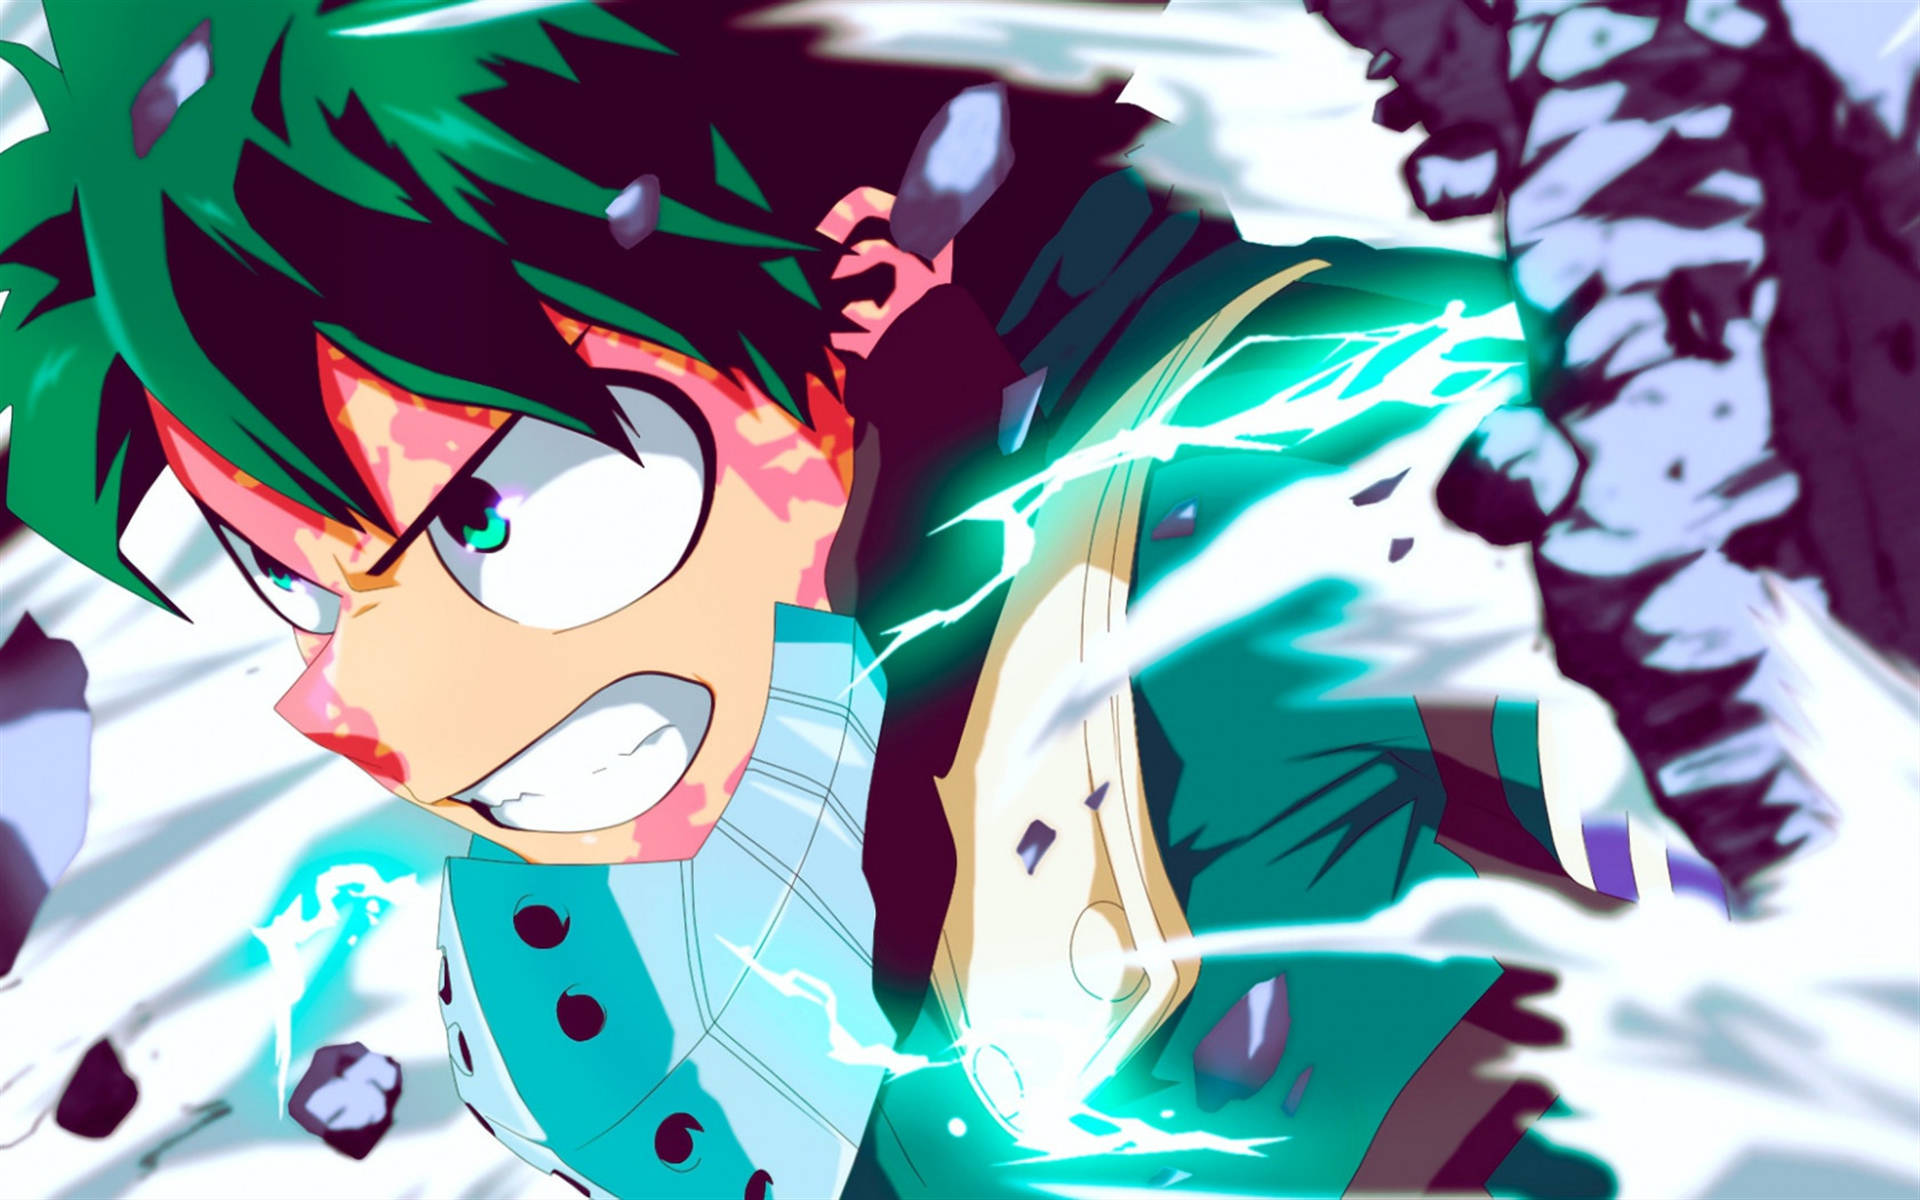 Deku experiencing a moment of triumph on the battlefield. Wallpaper